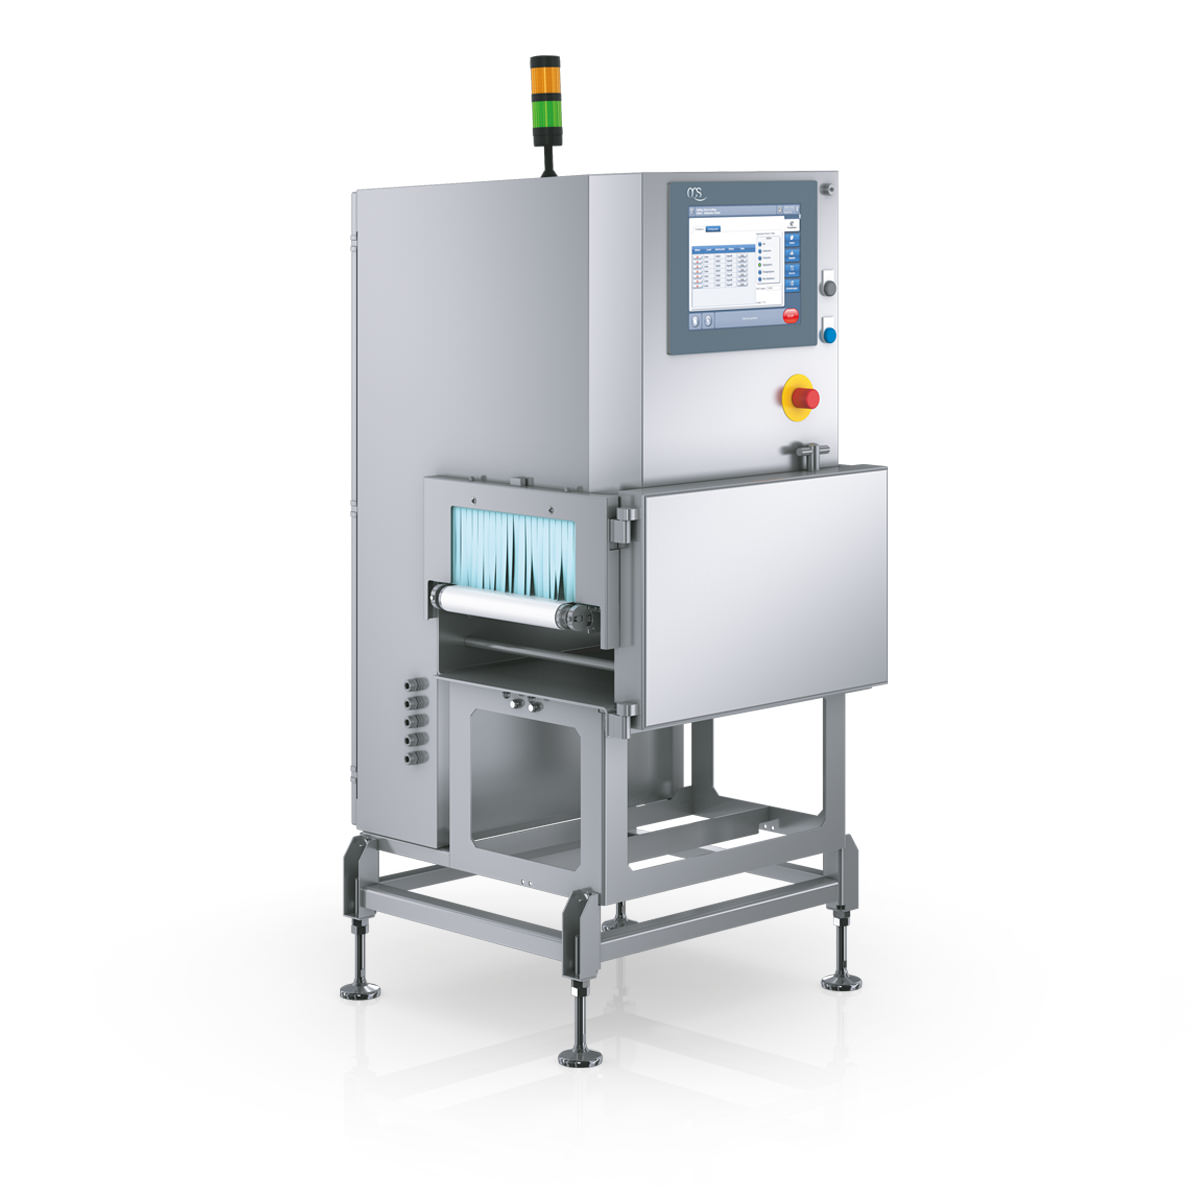 E Series x-ray inspection system